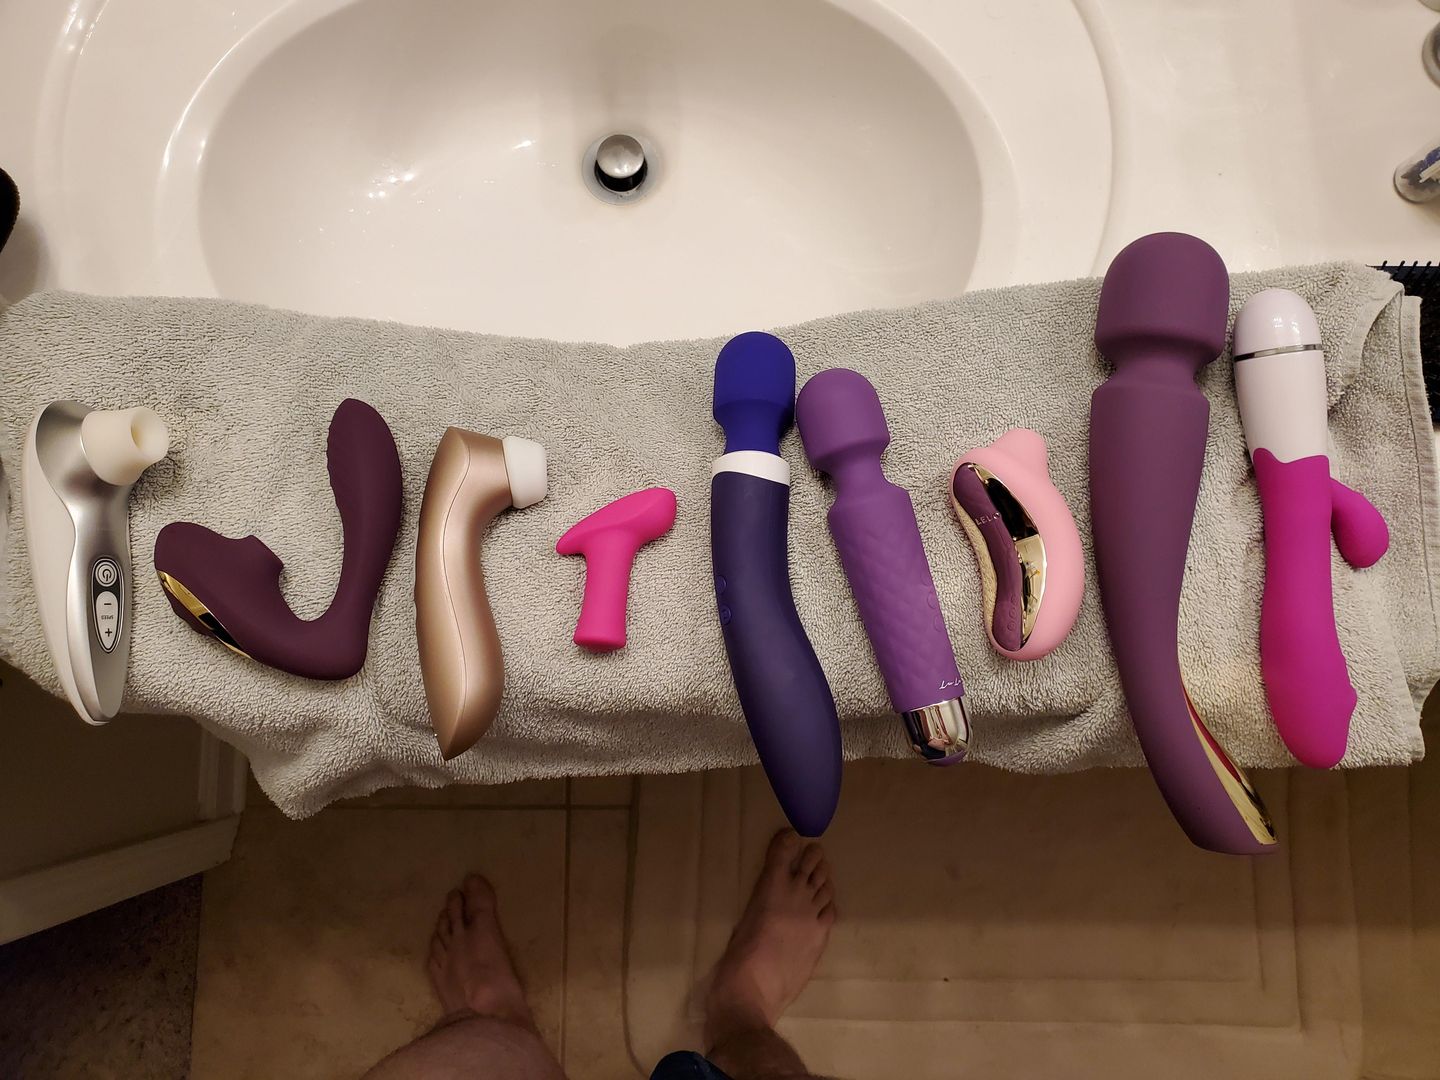 Weekly cleaning of my wifes sex toys pic picture